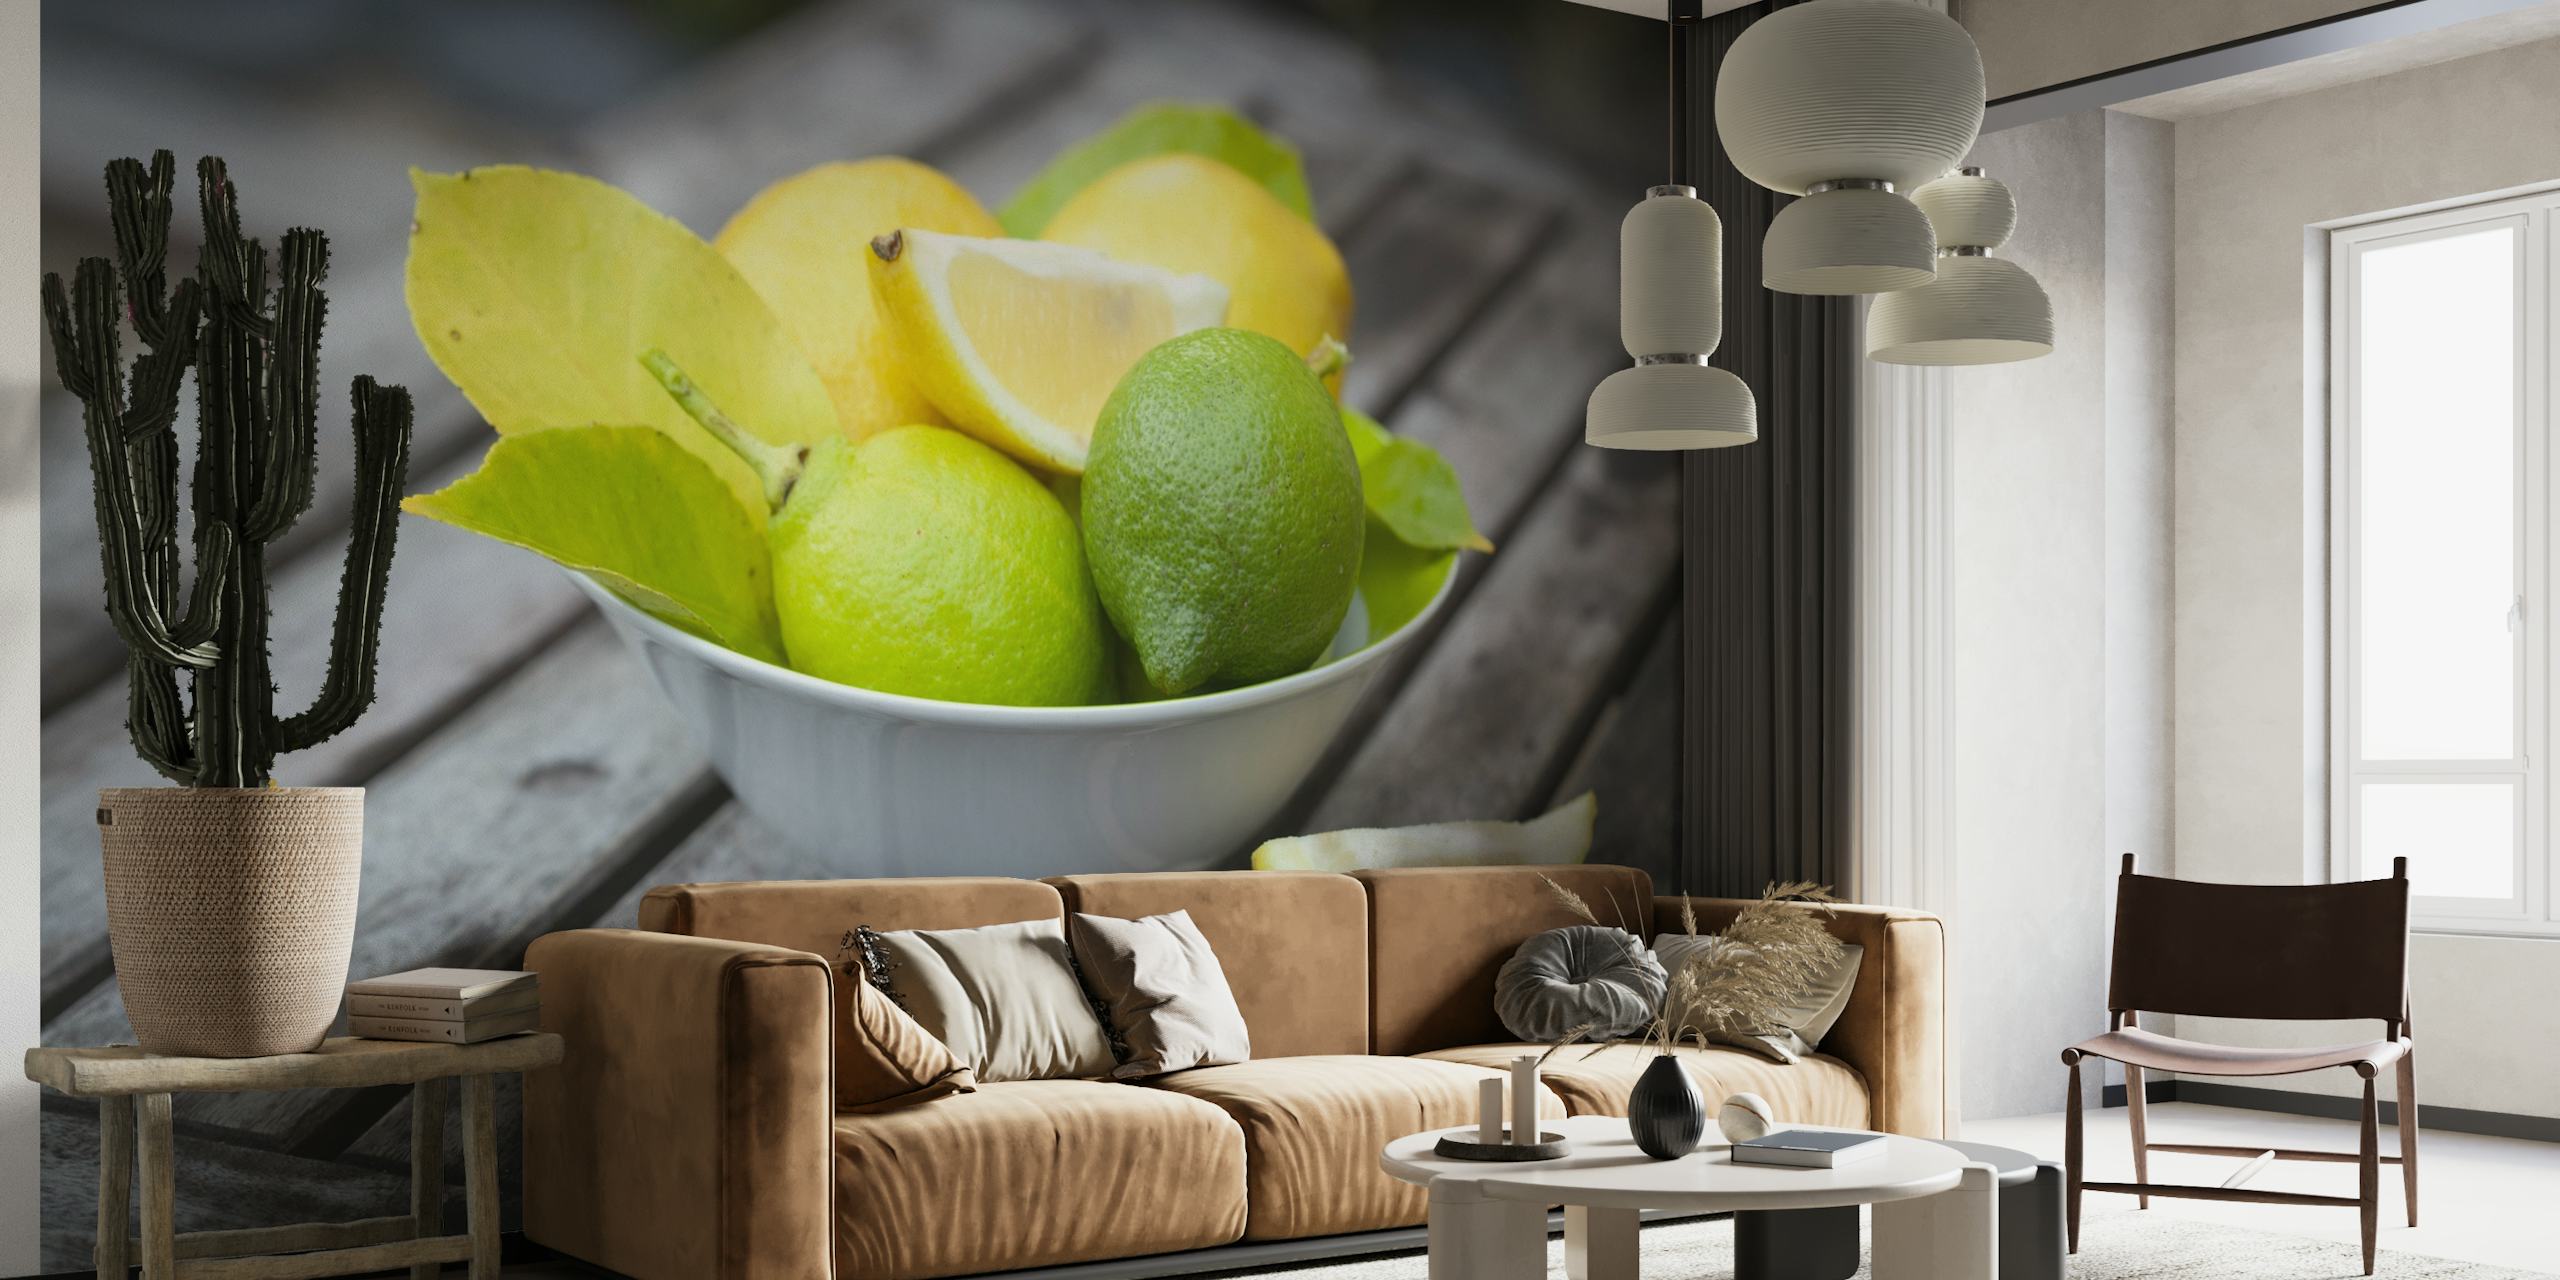 Bowl of fresh lemons and limes on wooden table wall mural